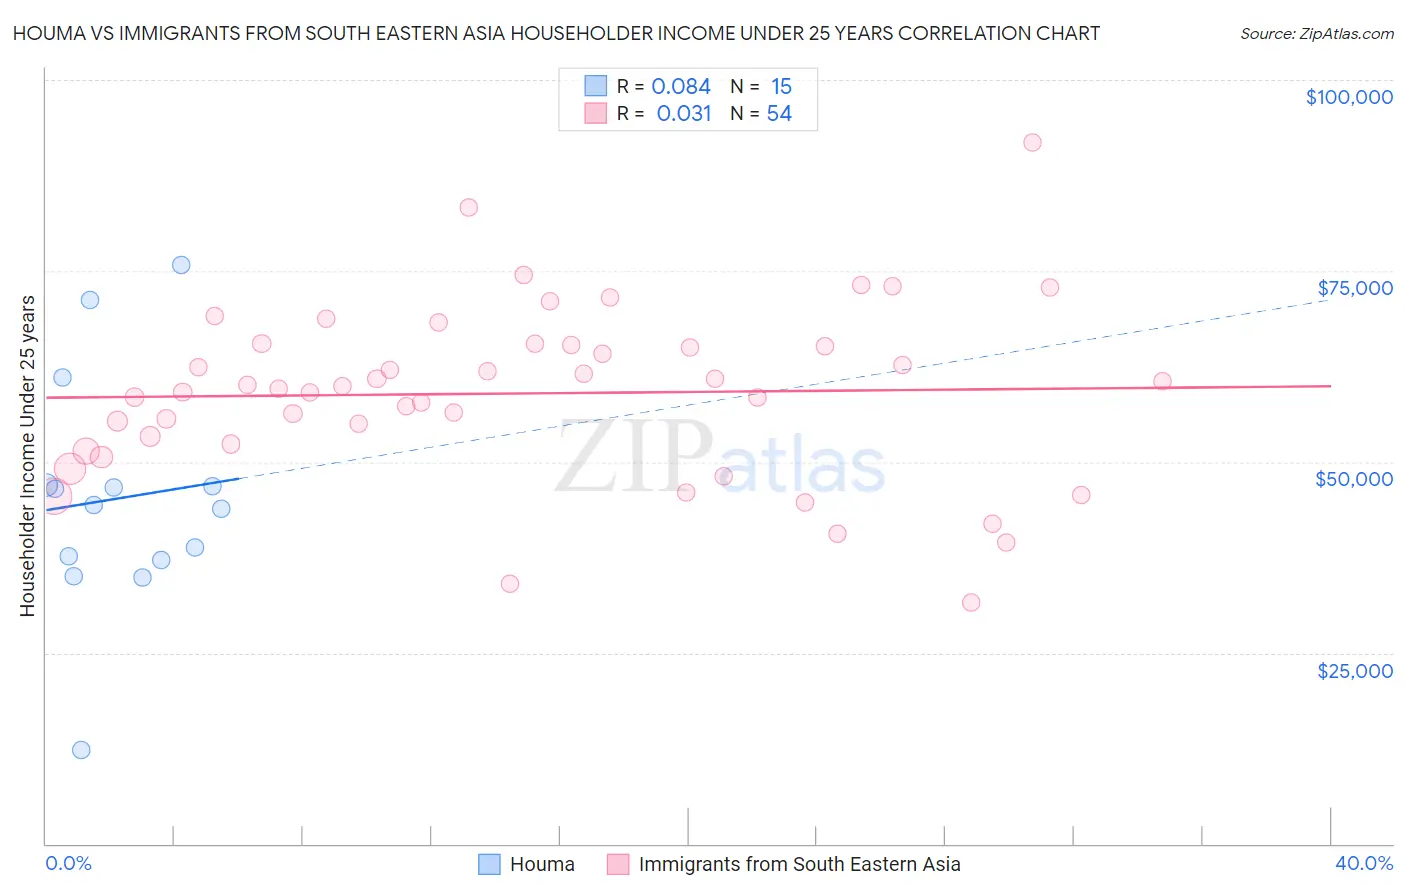 Houma vs Immigrants from South Eastern Asia Householder Income Under 25 years